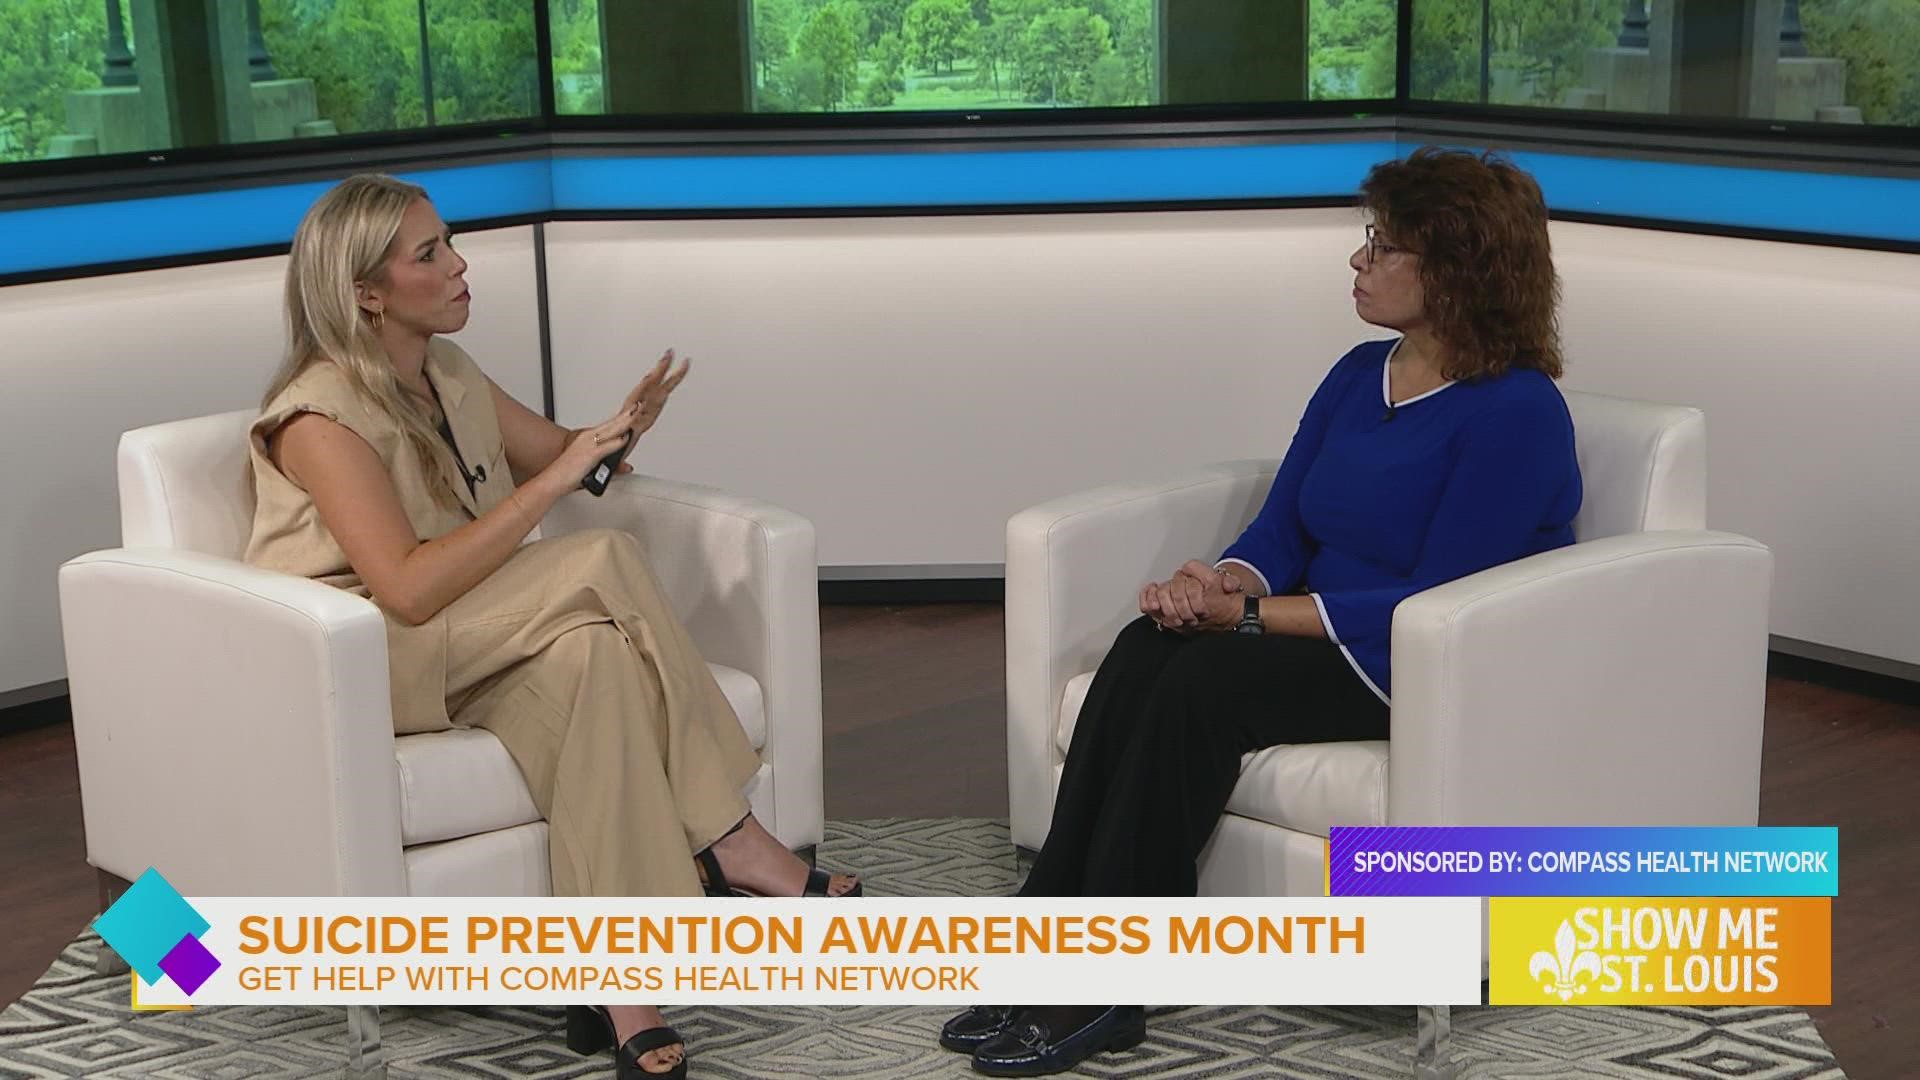 Dr. Duru Sakhrani, Psychiatrist at Compass Health Network stops by to shed more light on this very important topic.